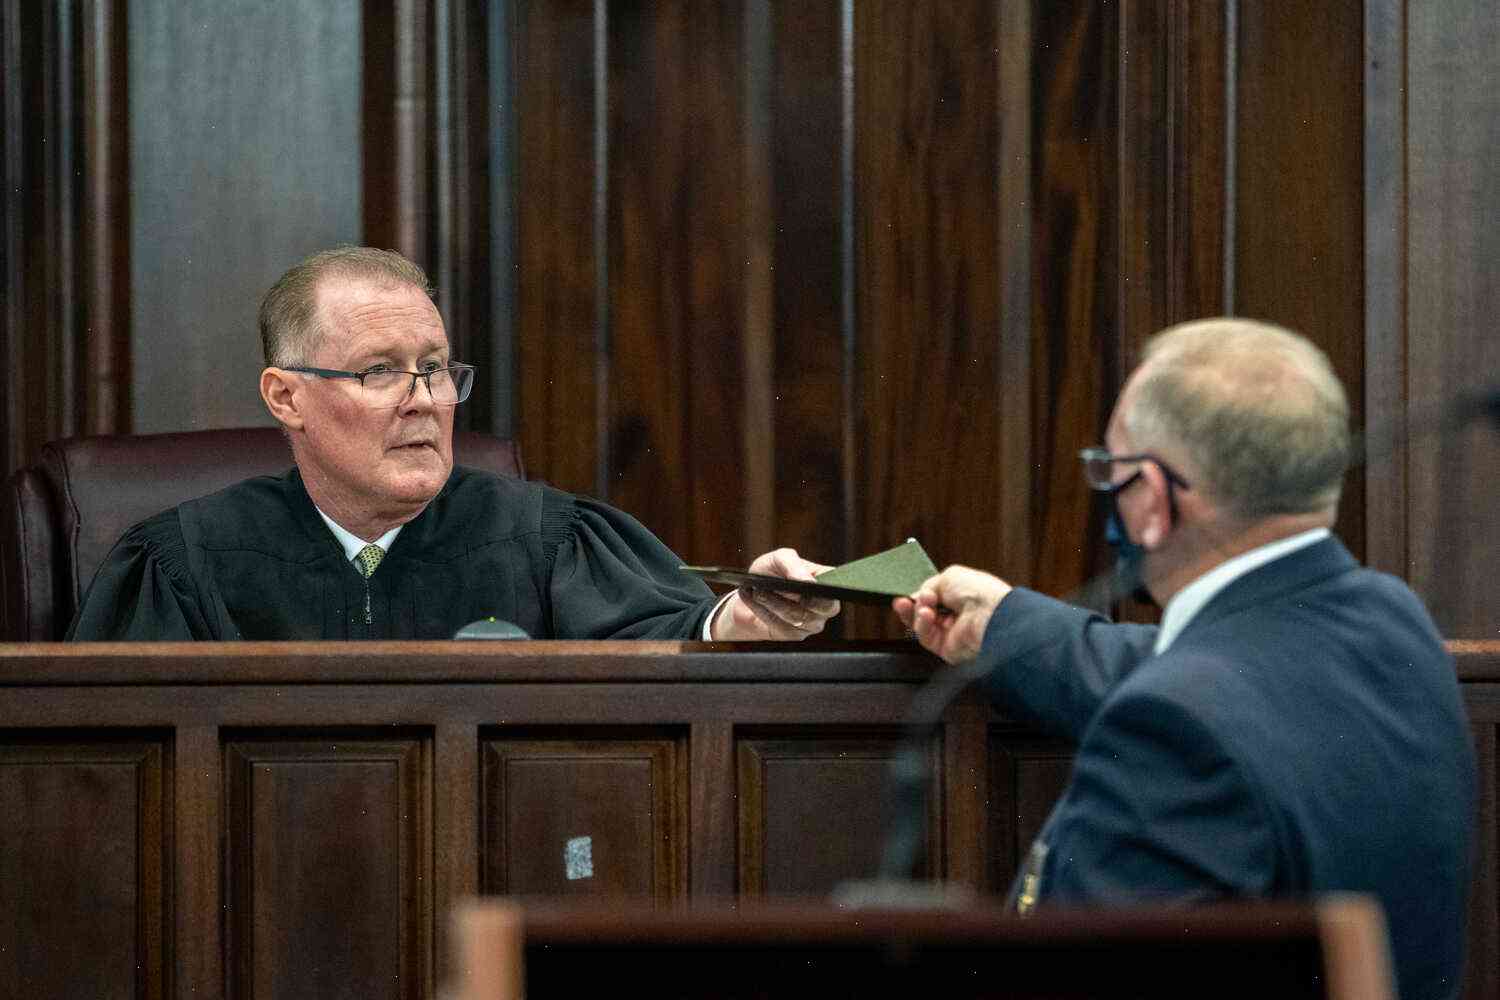 Pennsylvania Supreme Court weighs Trump bid to block hearings in collusion case